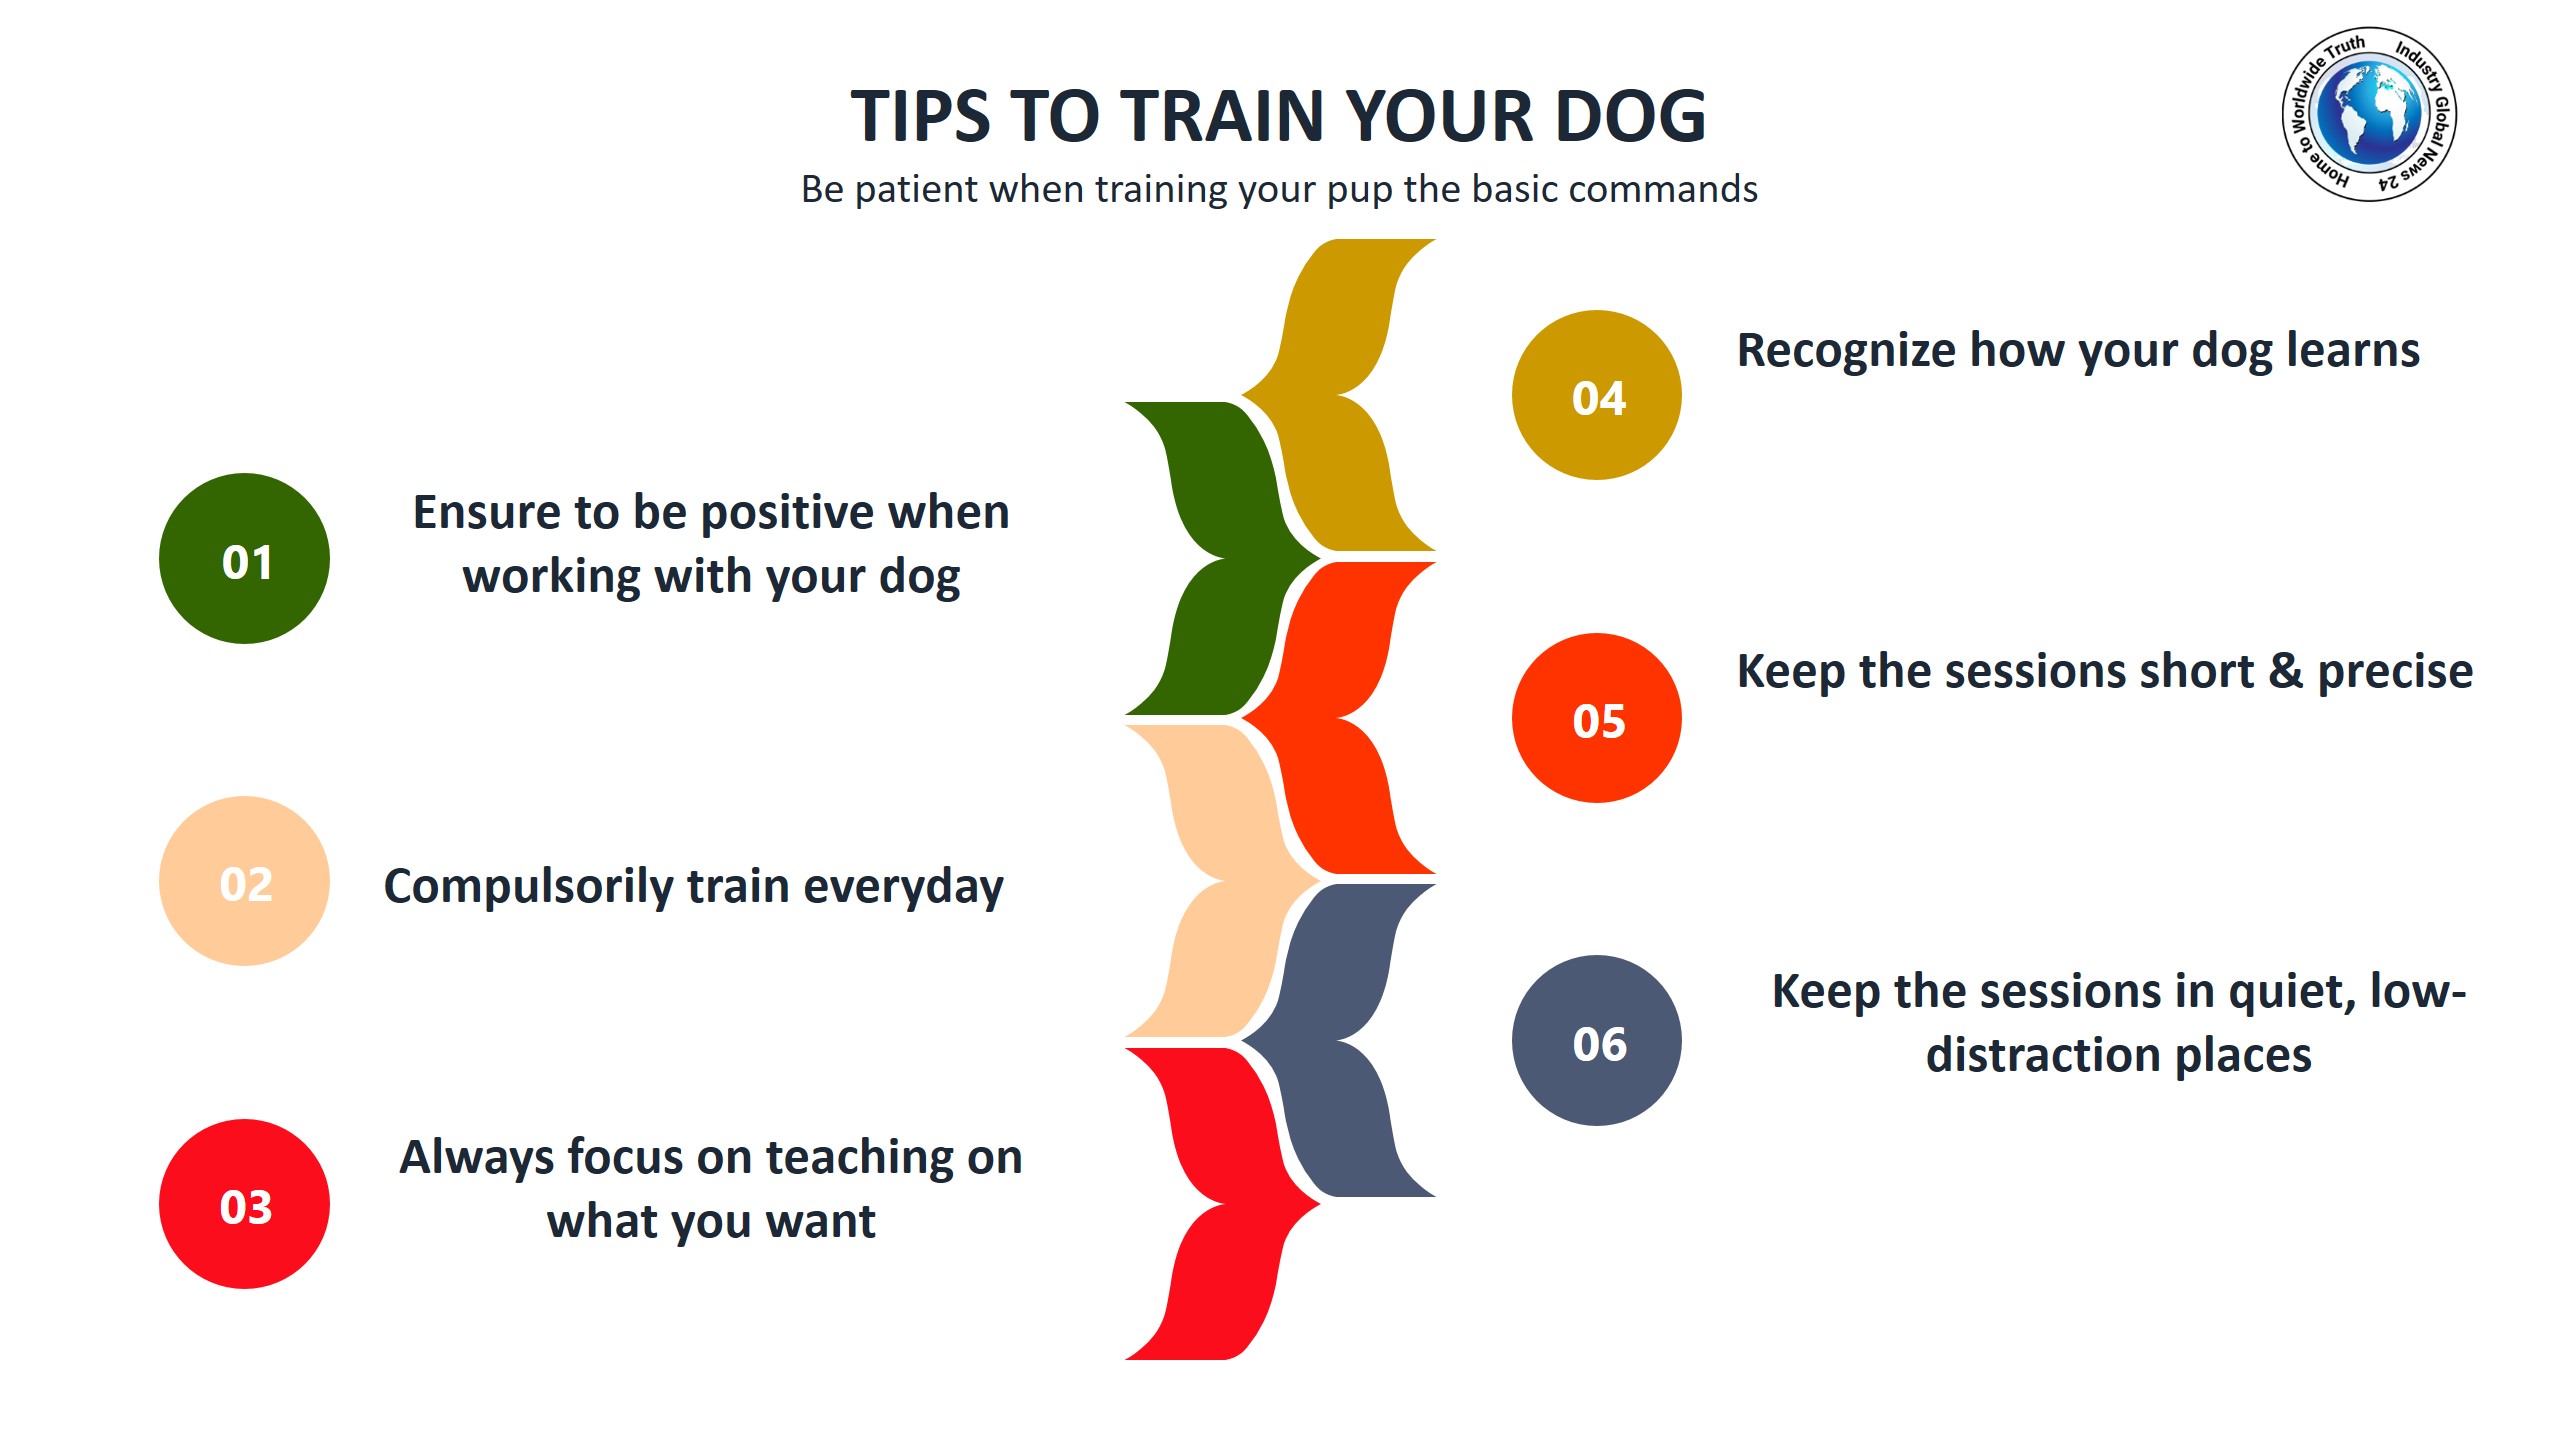 Tips to train your dog